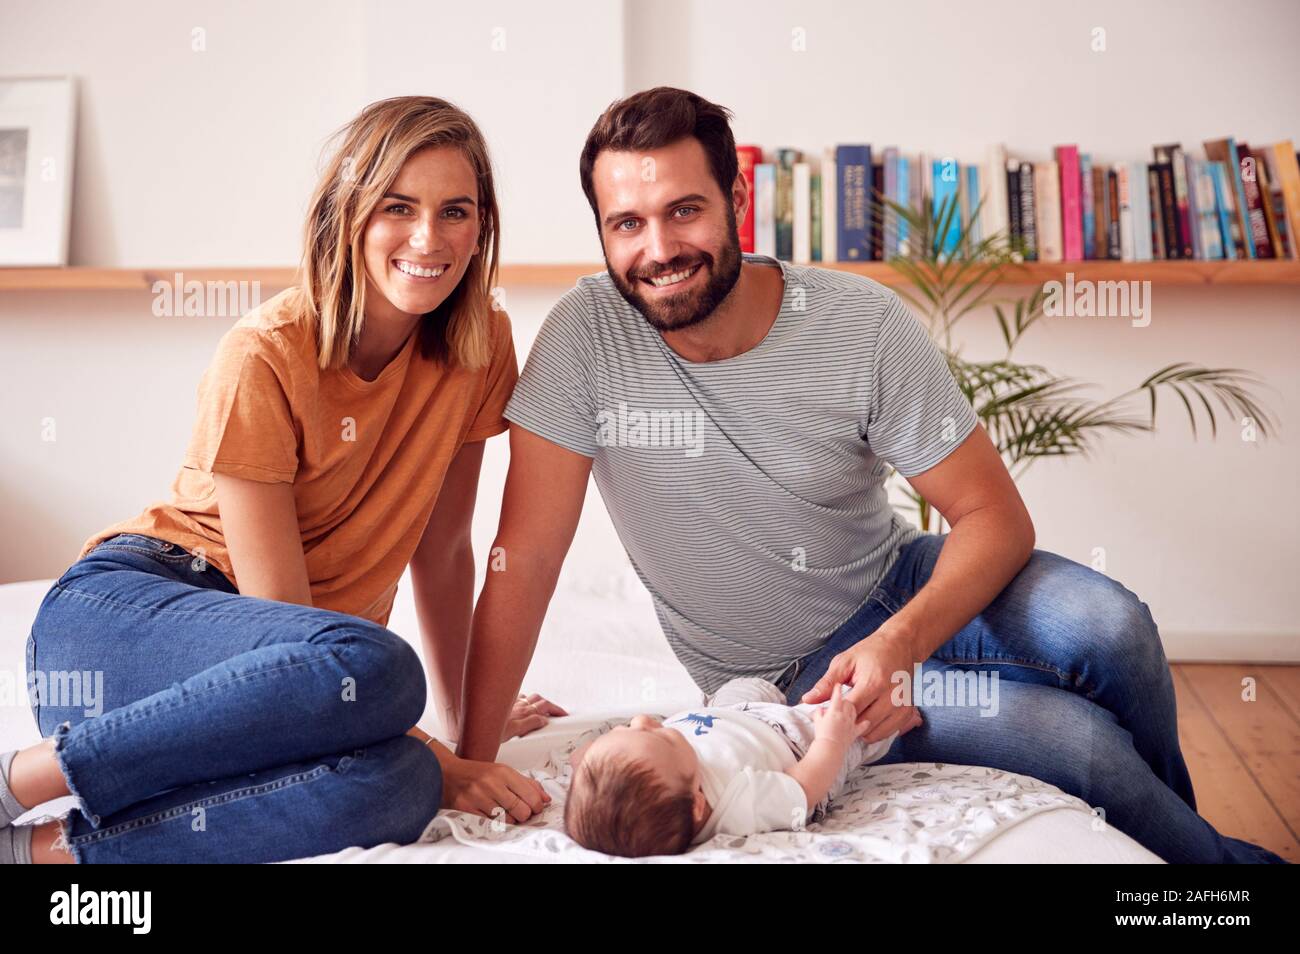 Portrait Of Loving Parents With Newborn Baby Lying On Bed At Home In Loft Apartment Stock Photo